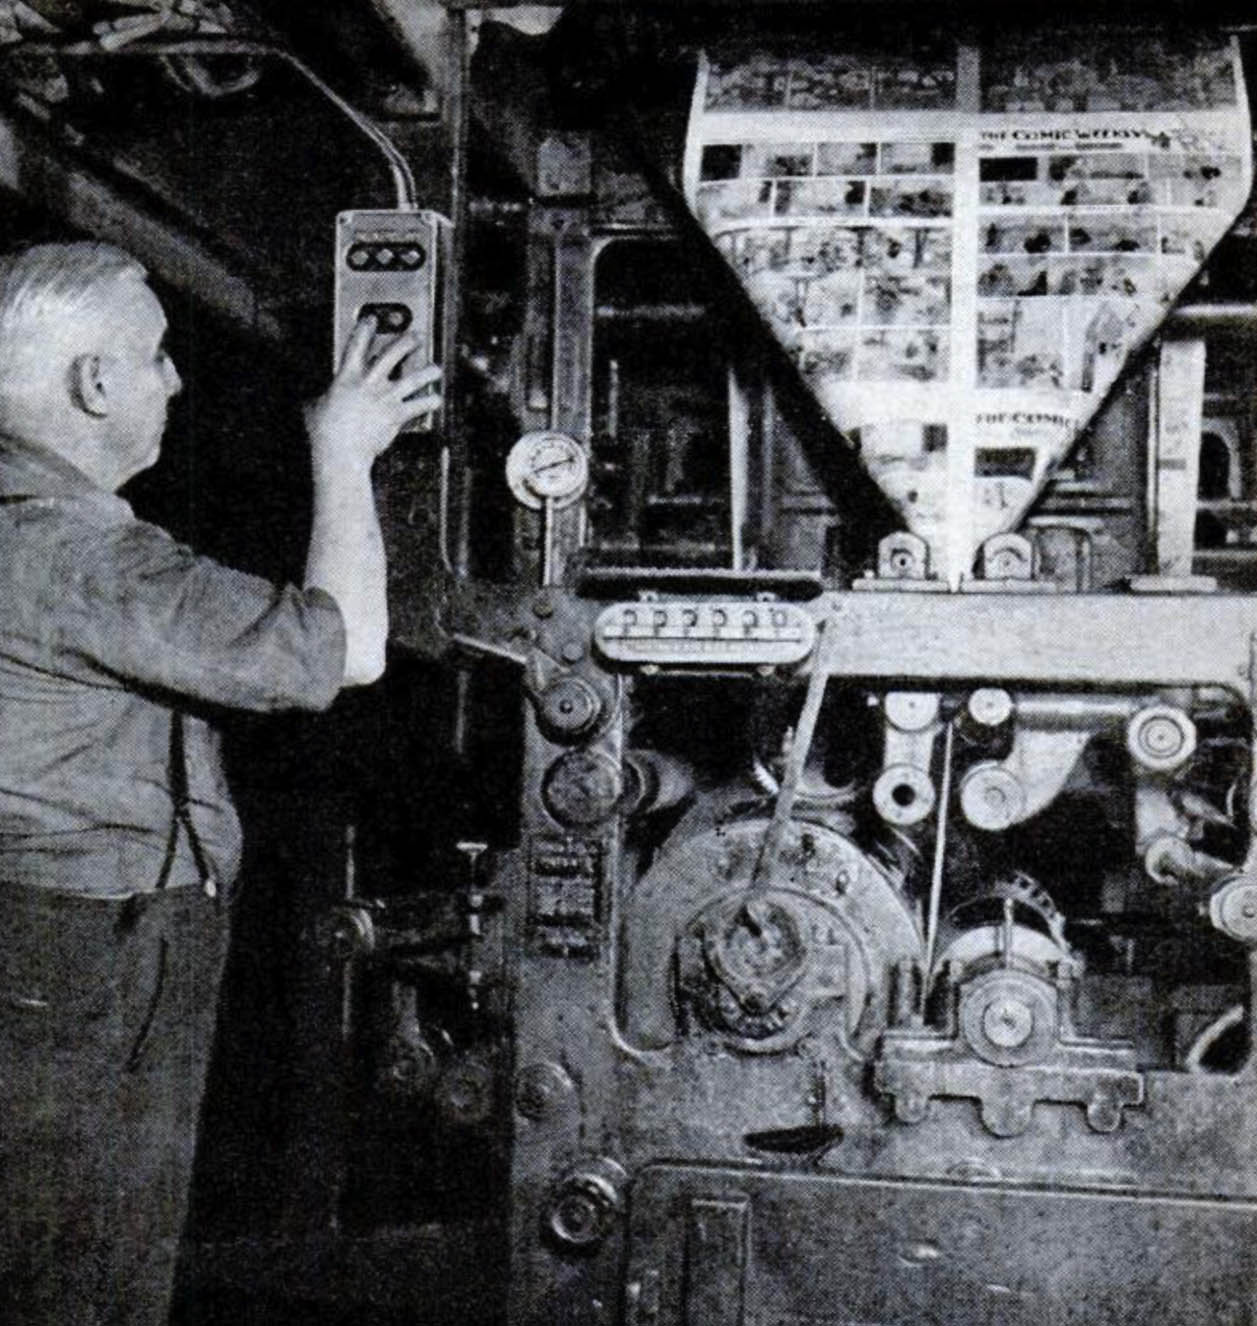 A press operator starts up the printing press to run the comics pages. (“Making of a Funny,”, p. 88.)